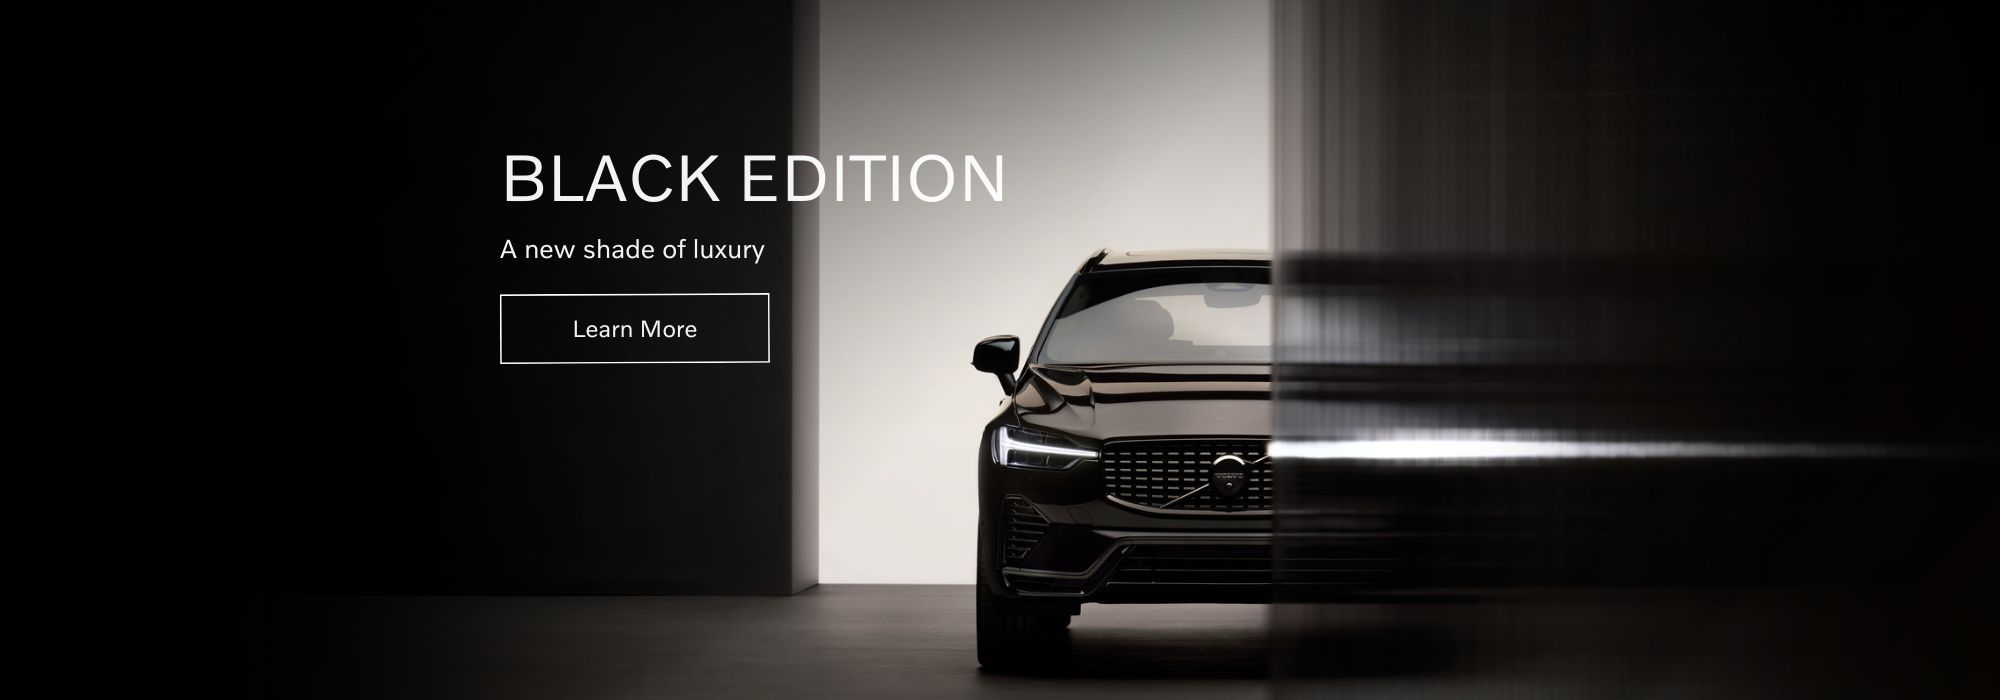 Volvo Black Edition - A new shade of luxury.